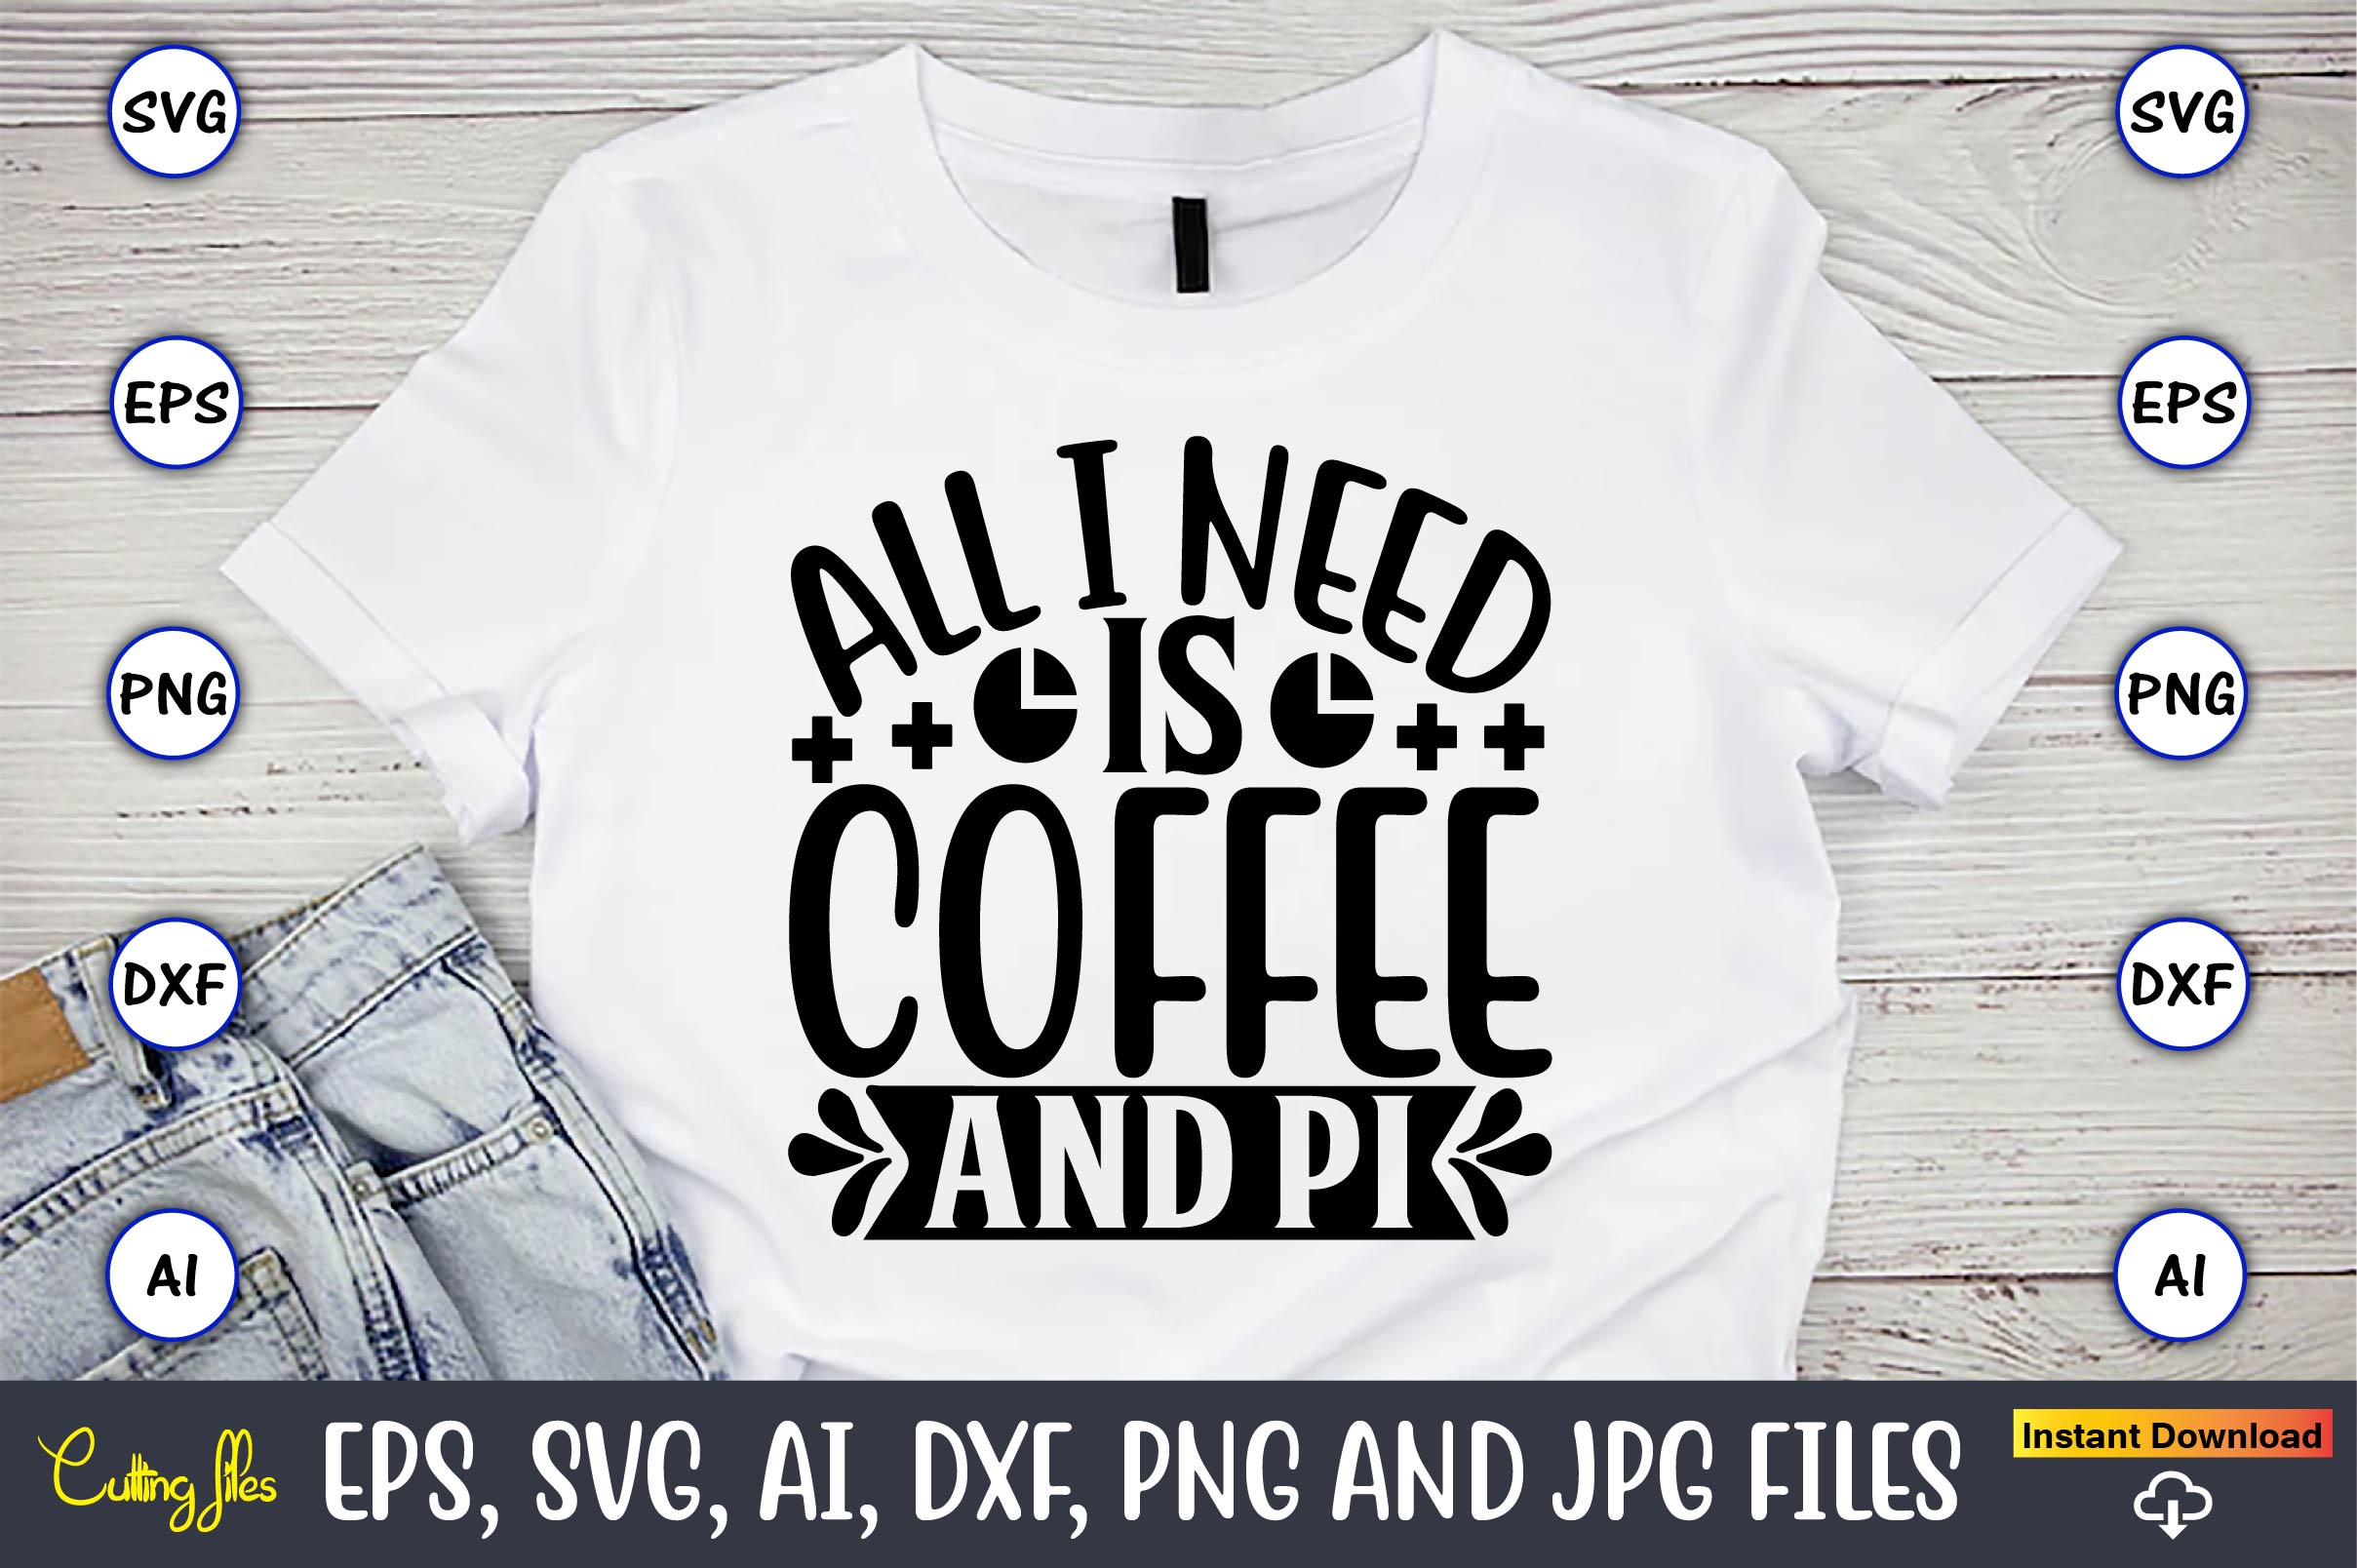 Image of a white t-shirt with an enchanting inscription All i need is coffee and pi.